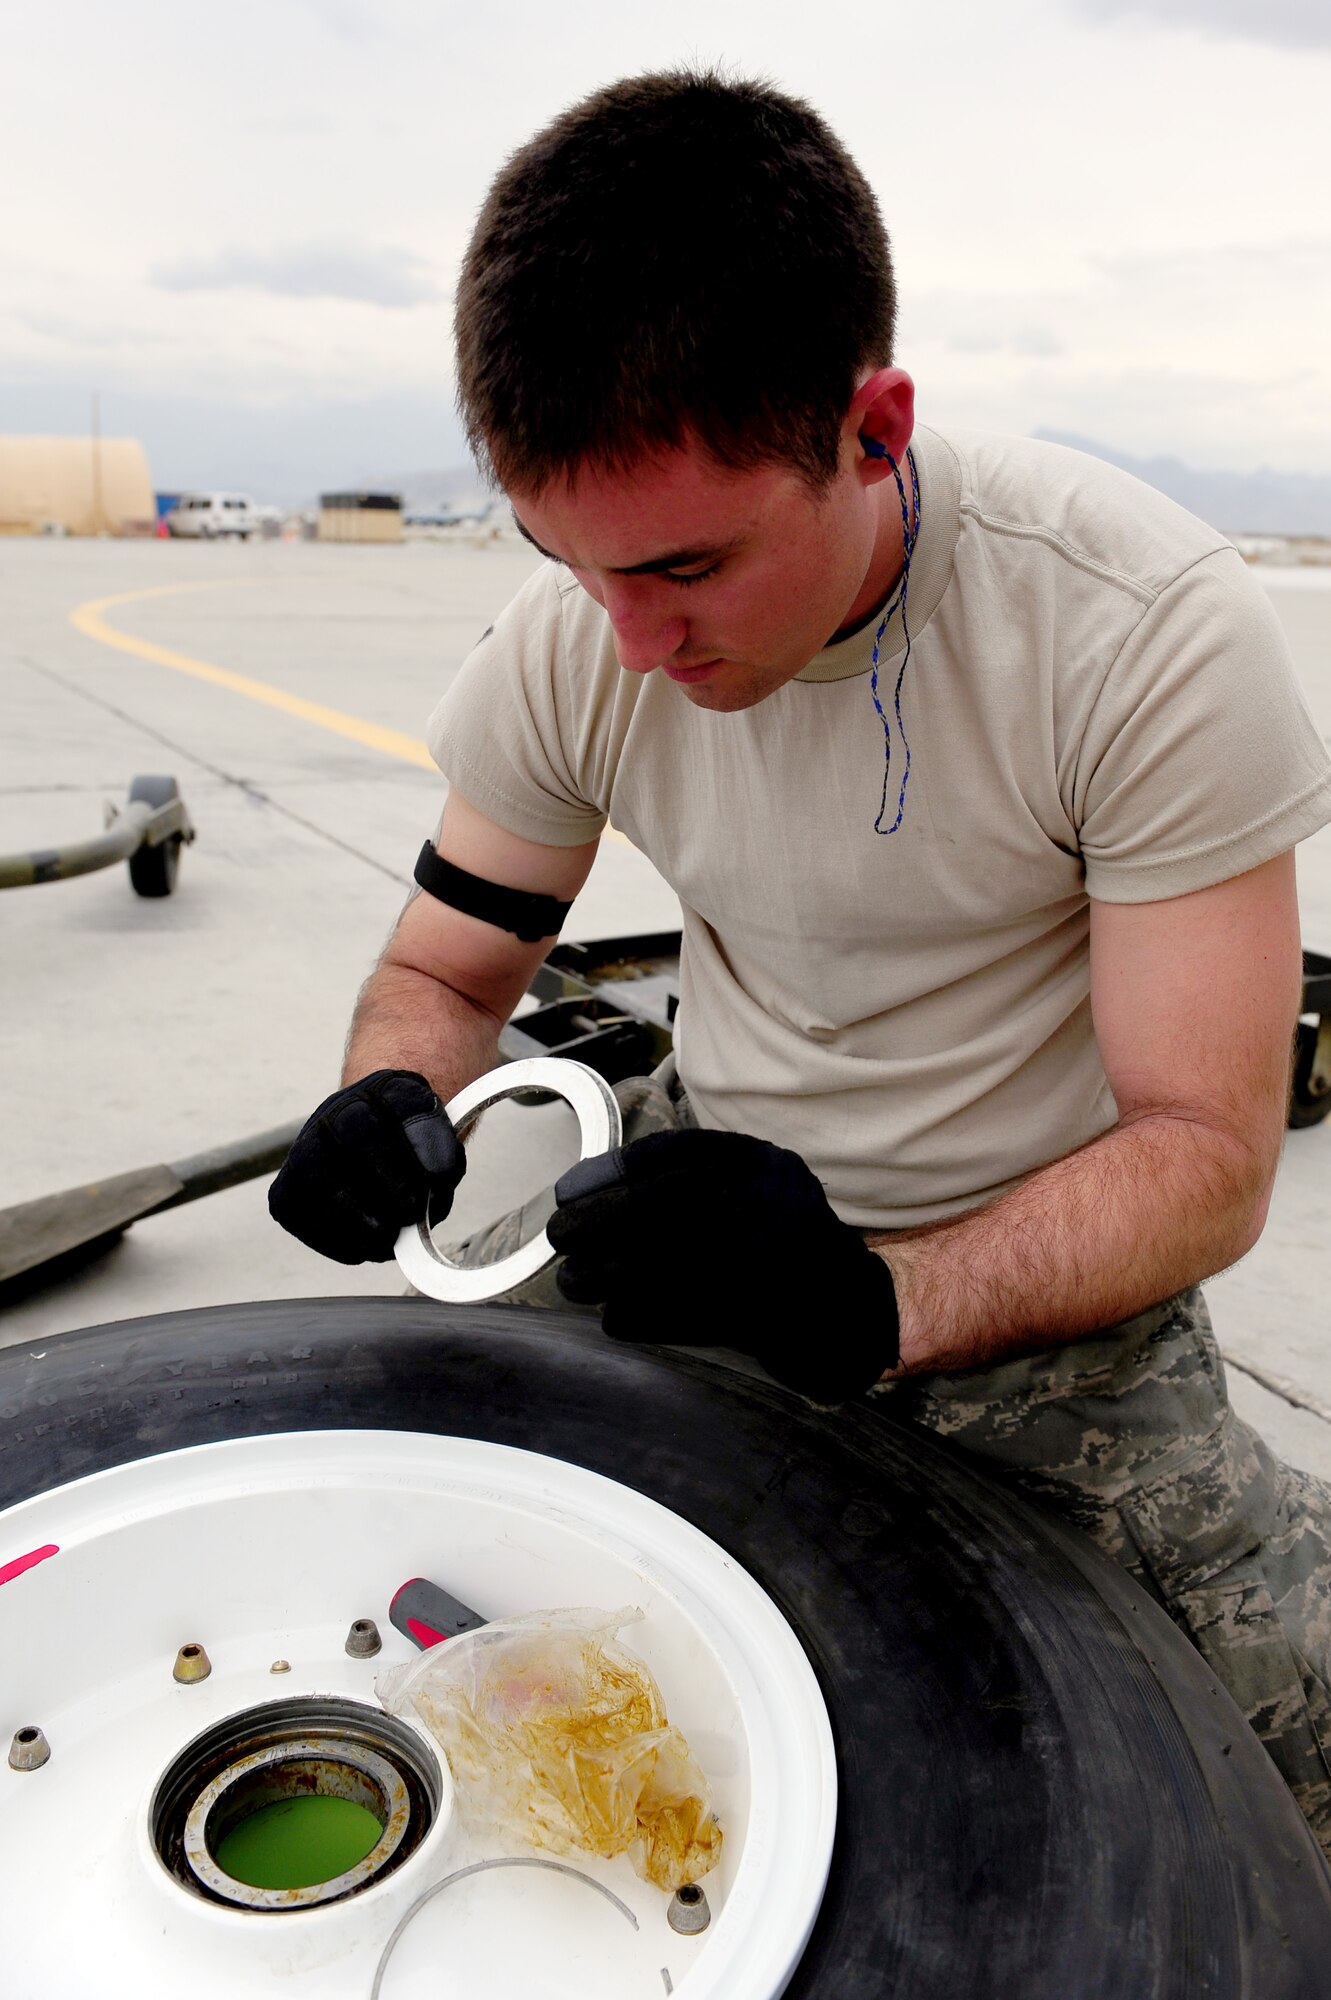 U.S. Air Force Senior Airman Kevin Perry, 455th Expeditionary Aircraft Maintenance Squadron crew chief, prepares a new tire to be installed on a C-130 Hercules aircraft at Bagram Airfield, Afghanistan, April 9, 2011. Perry is deployed from the Delaware Air National Guard’s 166th Aircraft Maintenance Squadron, New Castle, Del., supporting Operation Enduring Freedom. (U.S. Air Force photo/Master Sgt. William Greer)